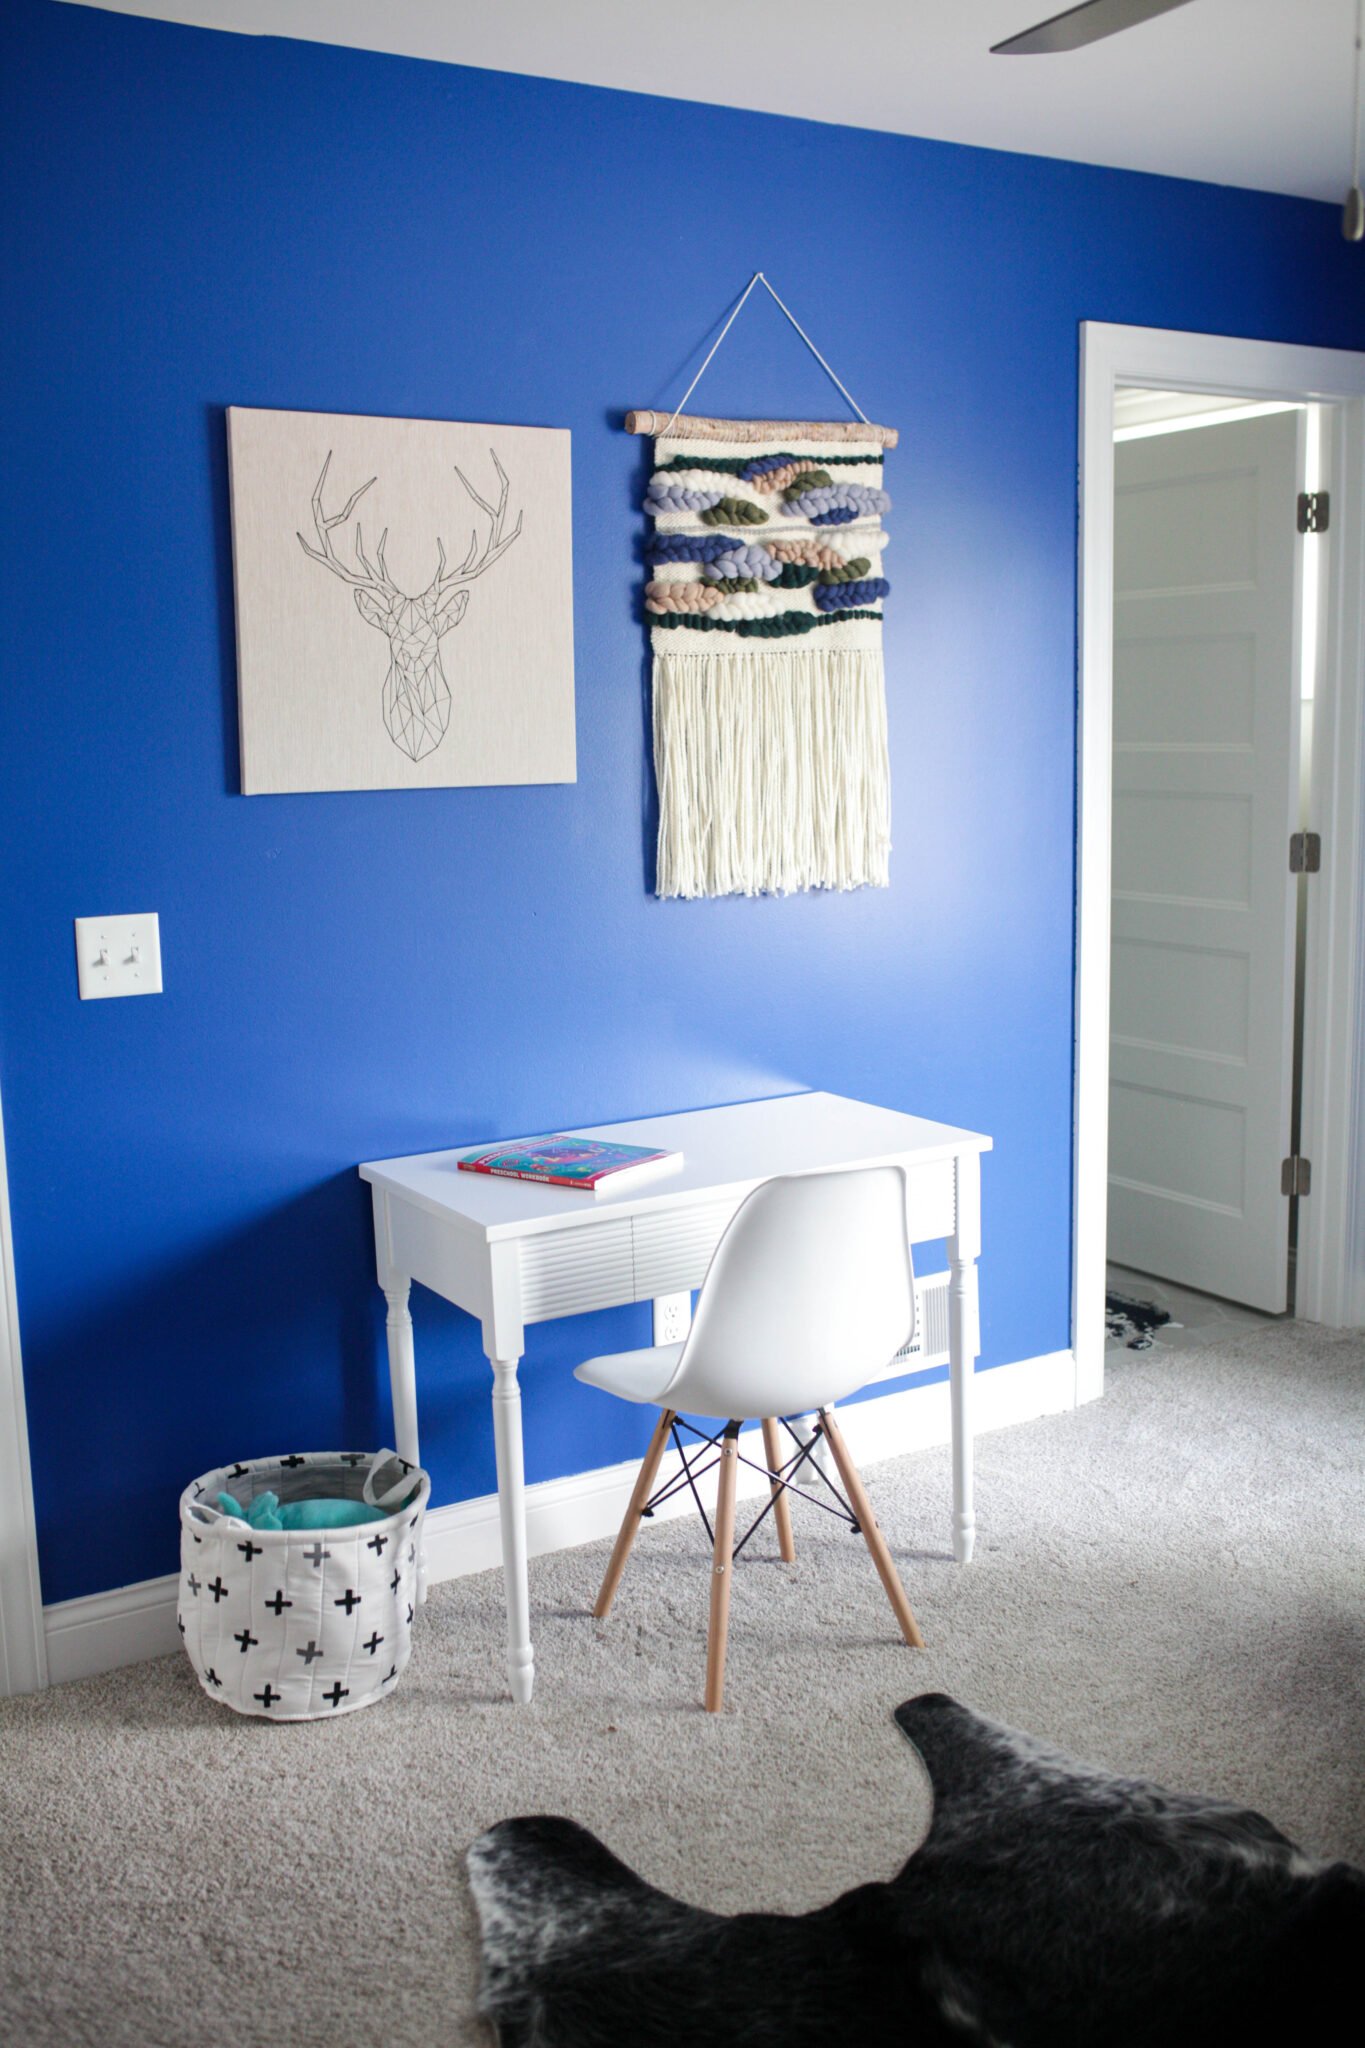 Desk and wall hanging with bright blue boys bedroom